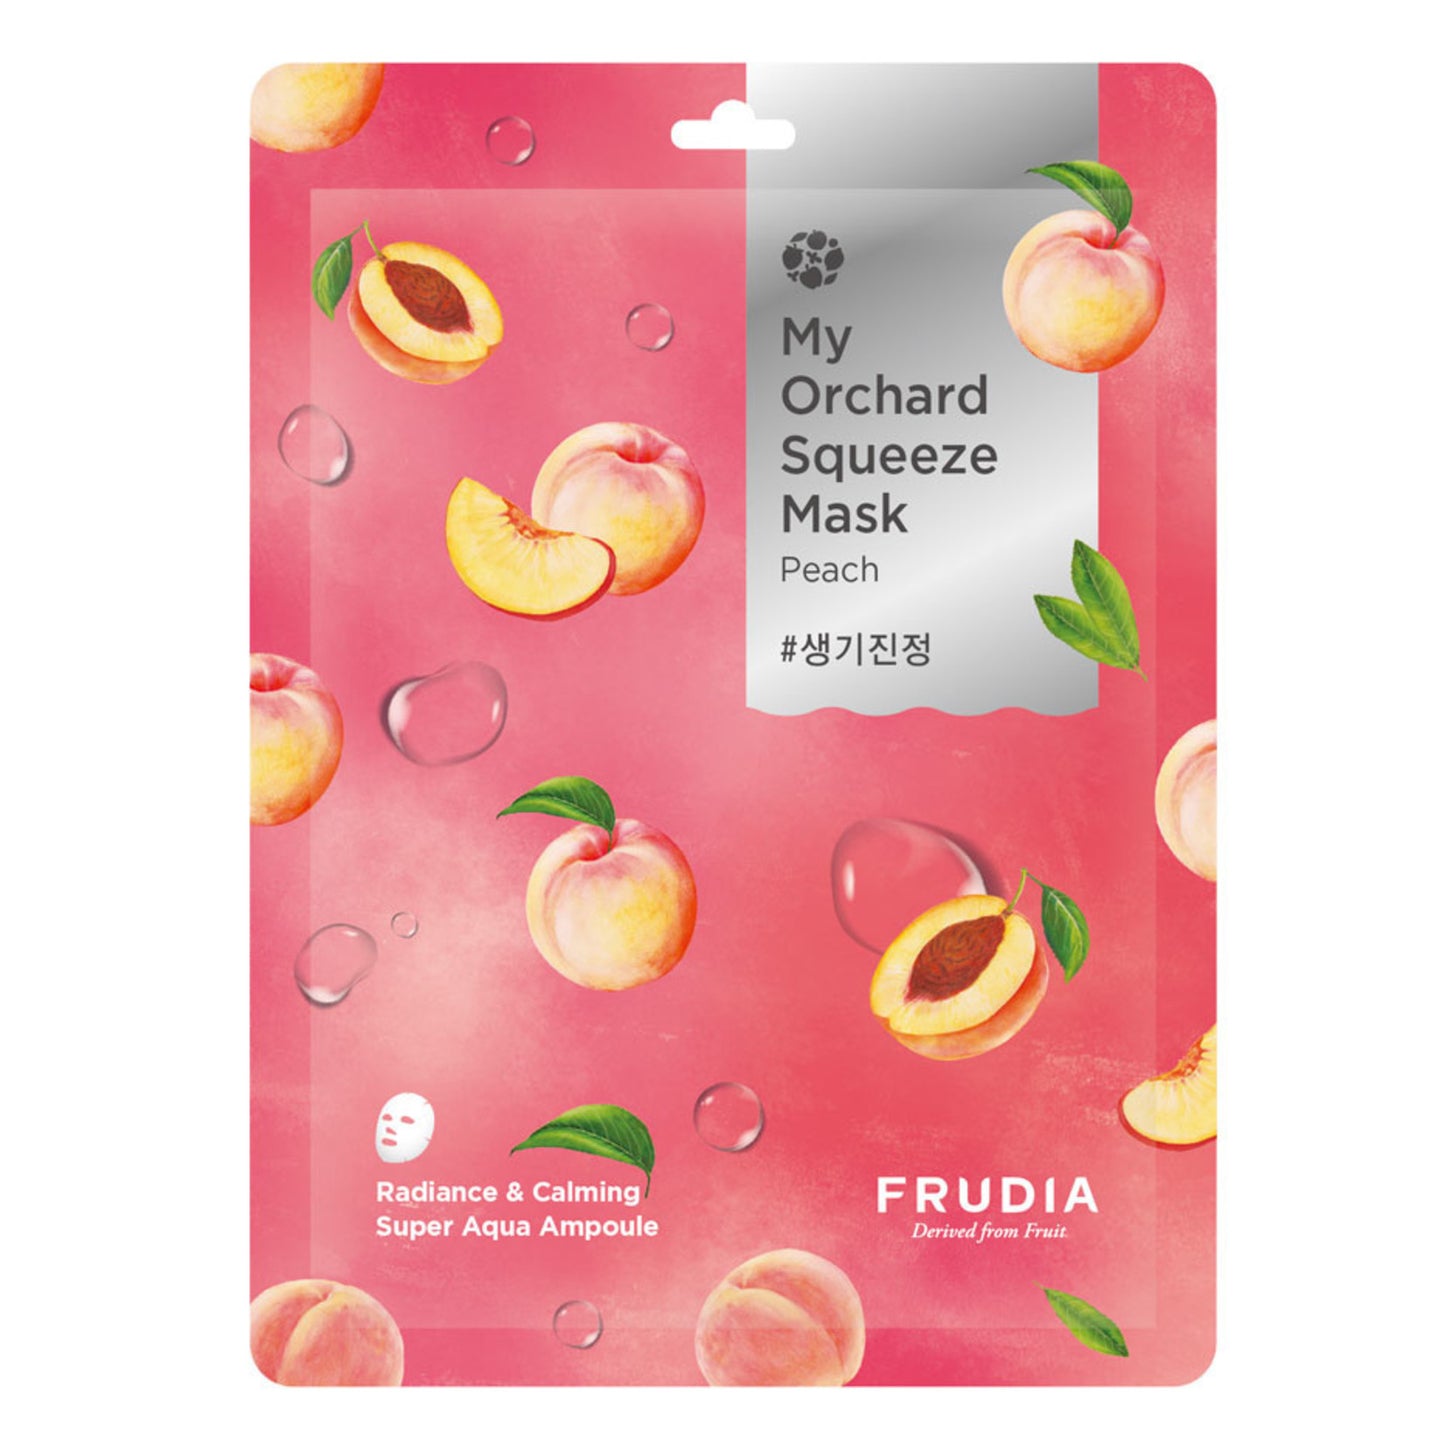 My Orchard Squeeze Mask